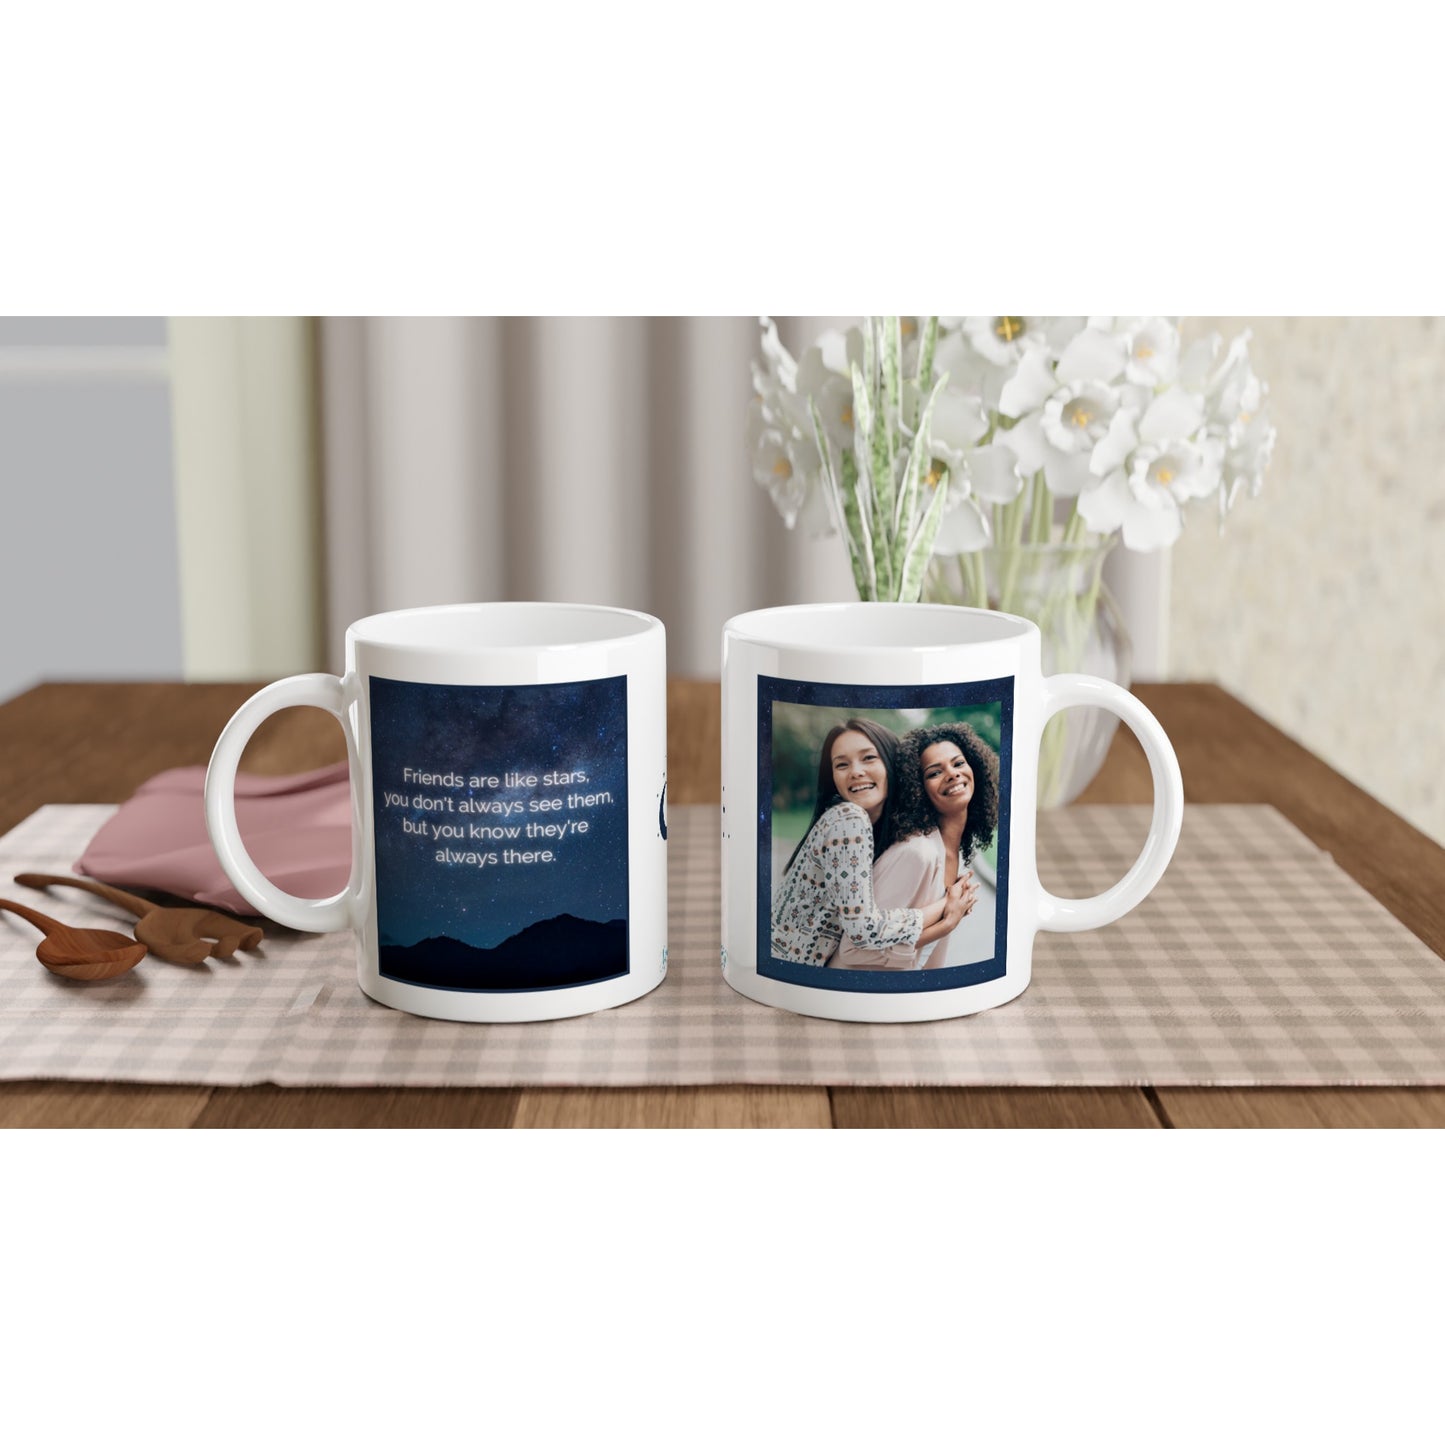 "Friends are like stars" Customizable Photo 11 oz. Mug front and back view on table